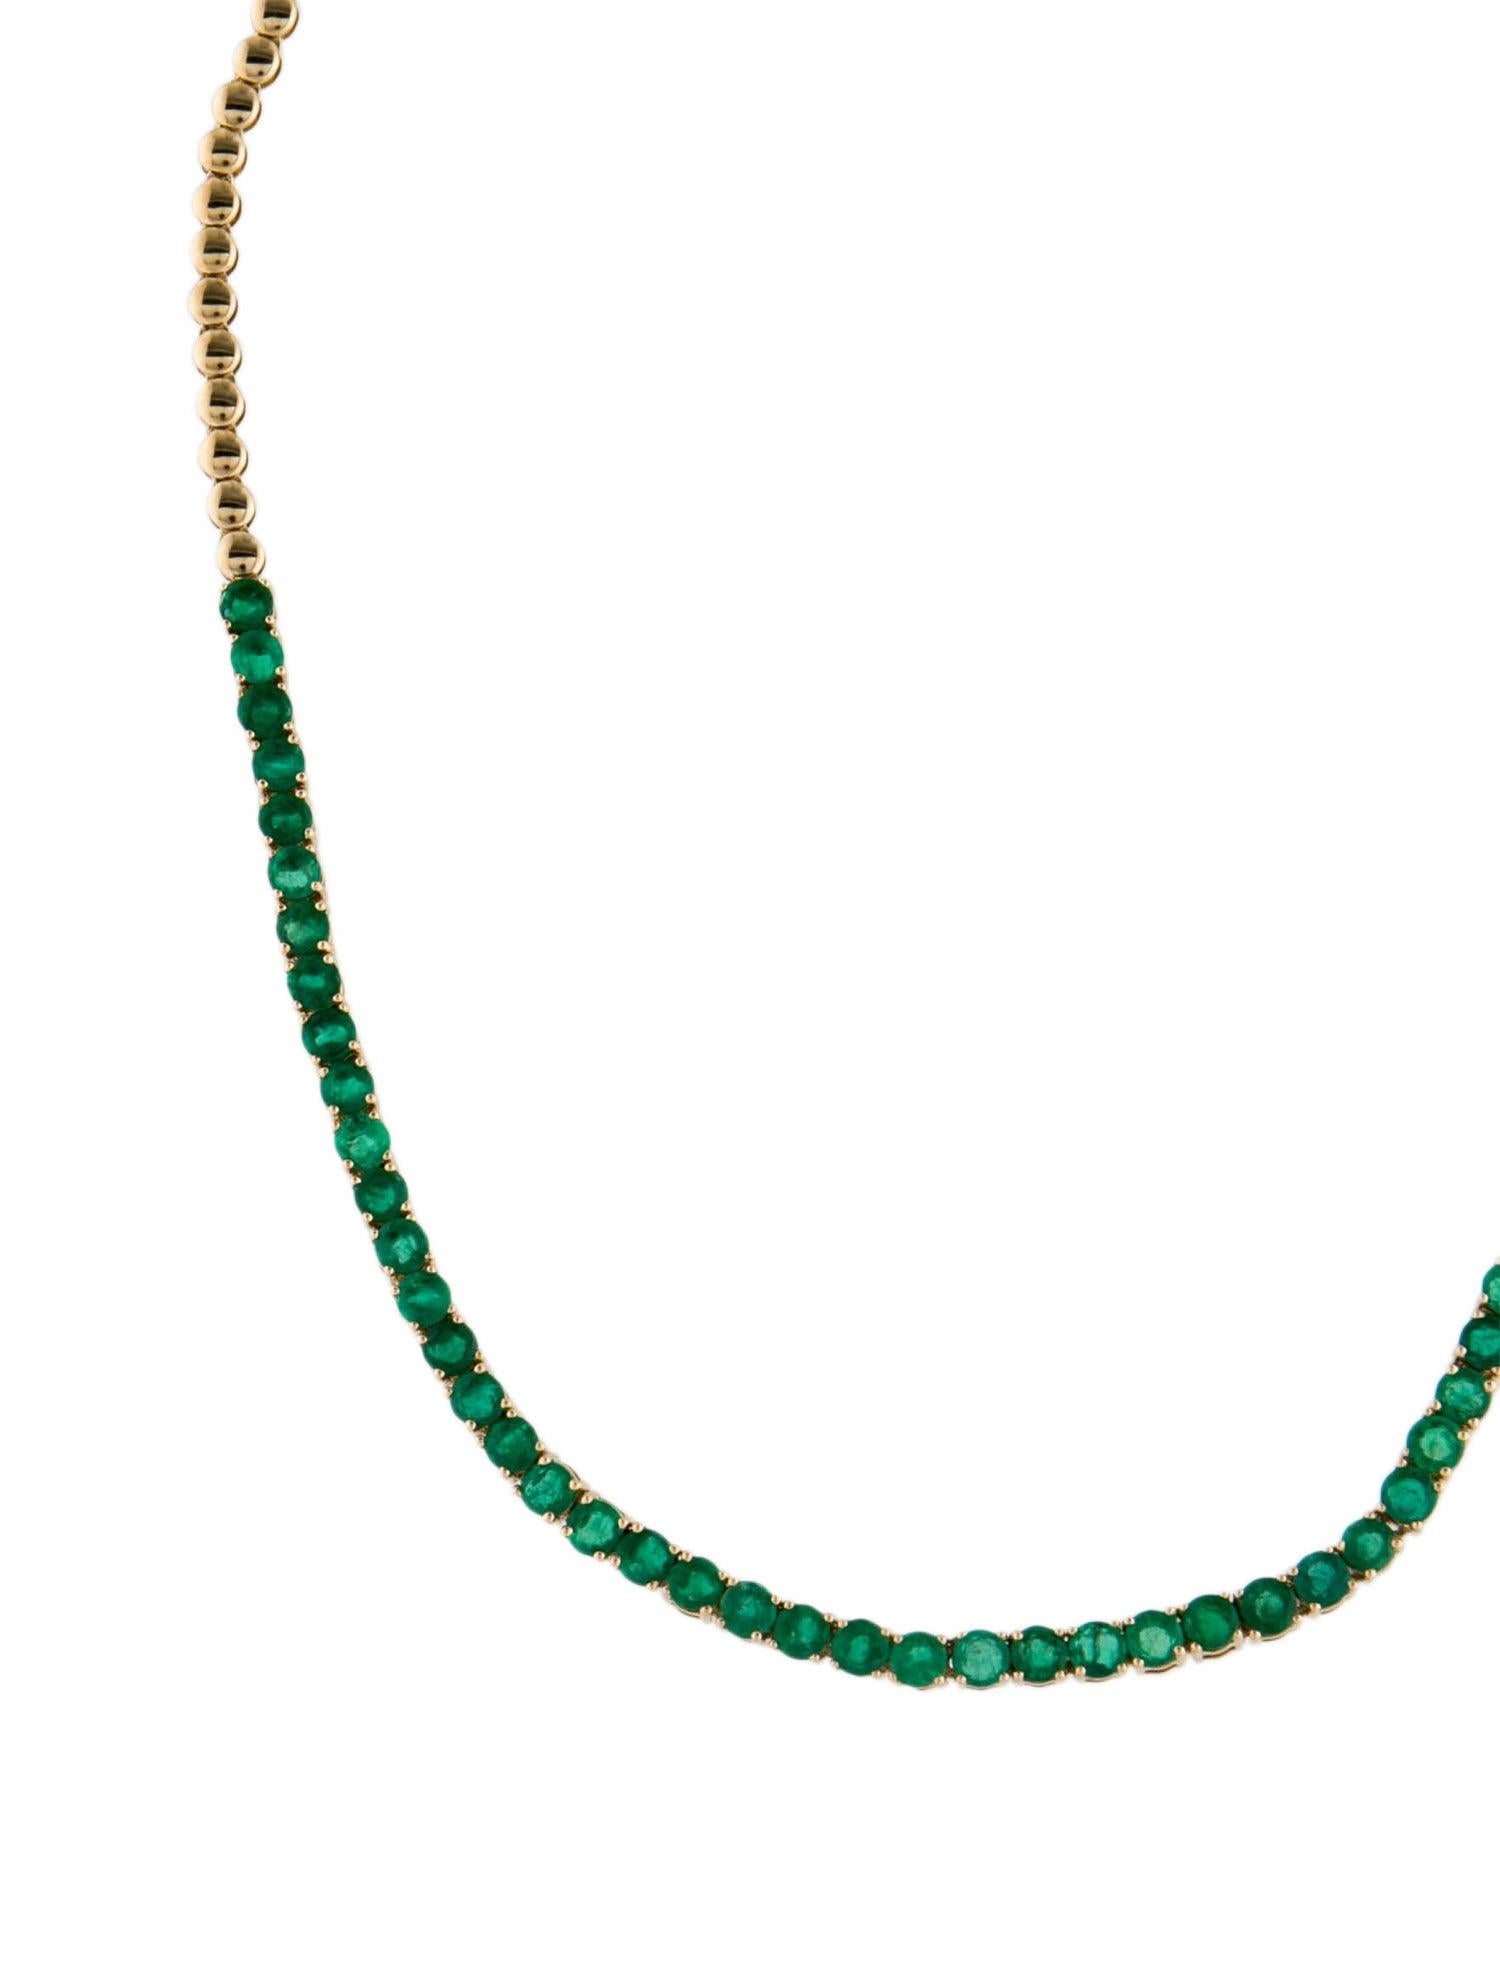 Immerse yourself in the enchanting allure of nature with our Forest Ferns Emerald Necklace. As part of our distinguished collection, this necklace encapsulates the very essence of the verdant forests that have captivated human hearts for